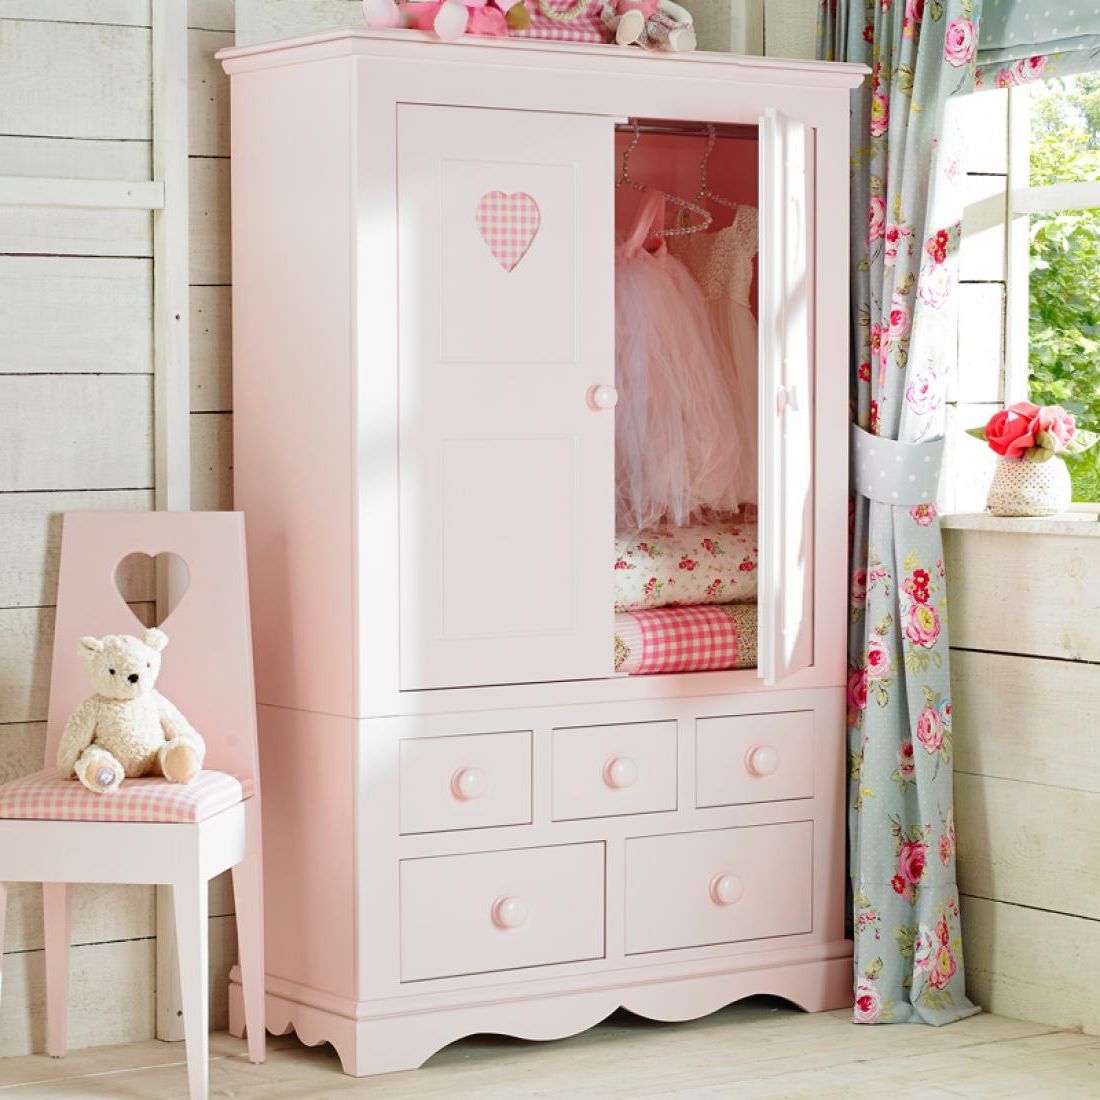 Looby Lou Combination Wardrobe | Childrens Wardrobe | Girls Wardrobe For Childrens Double Rail Wardrobes (View 15 of 20)